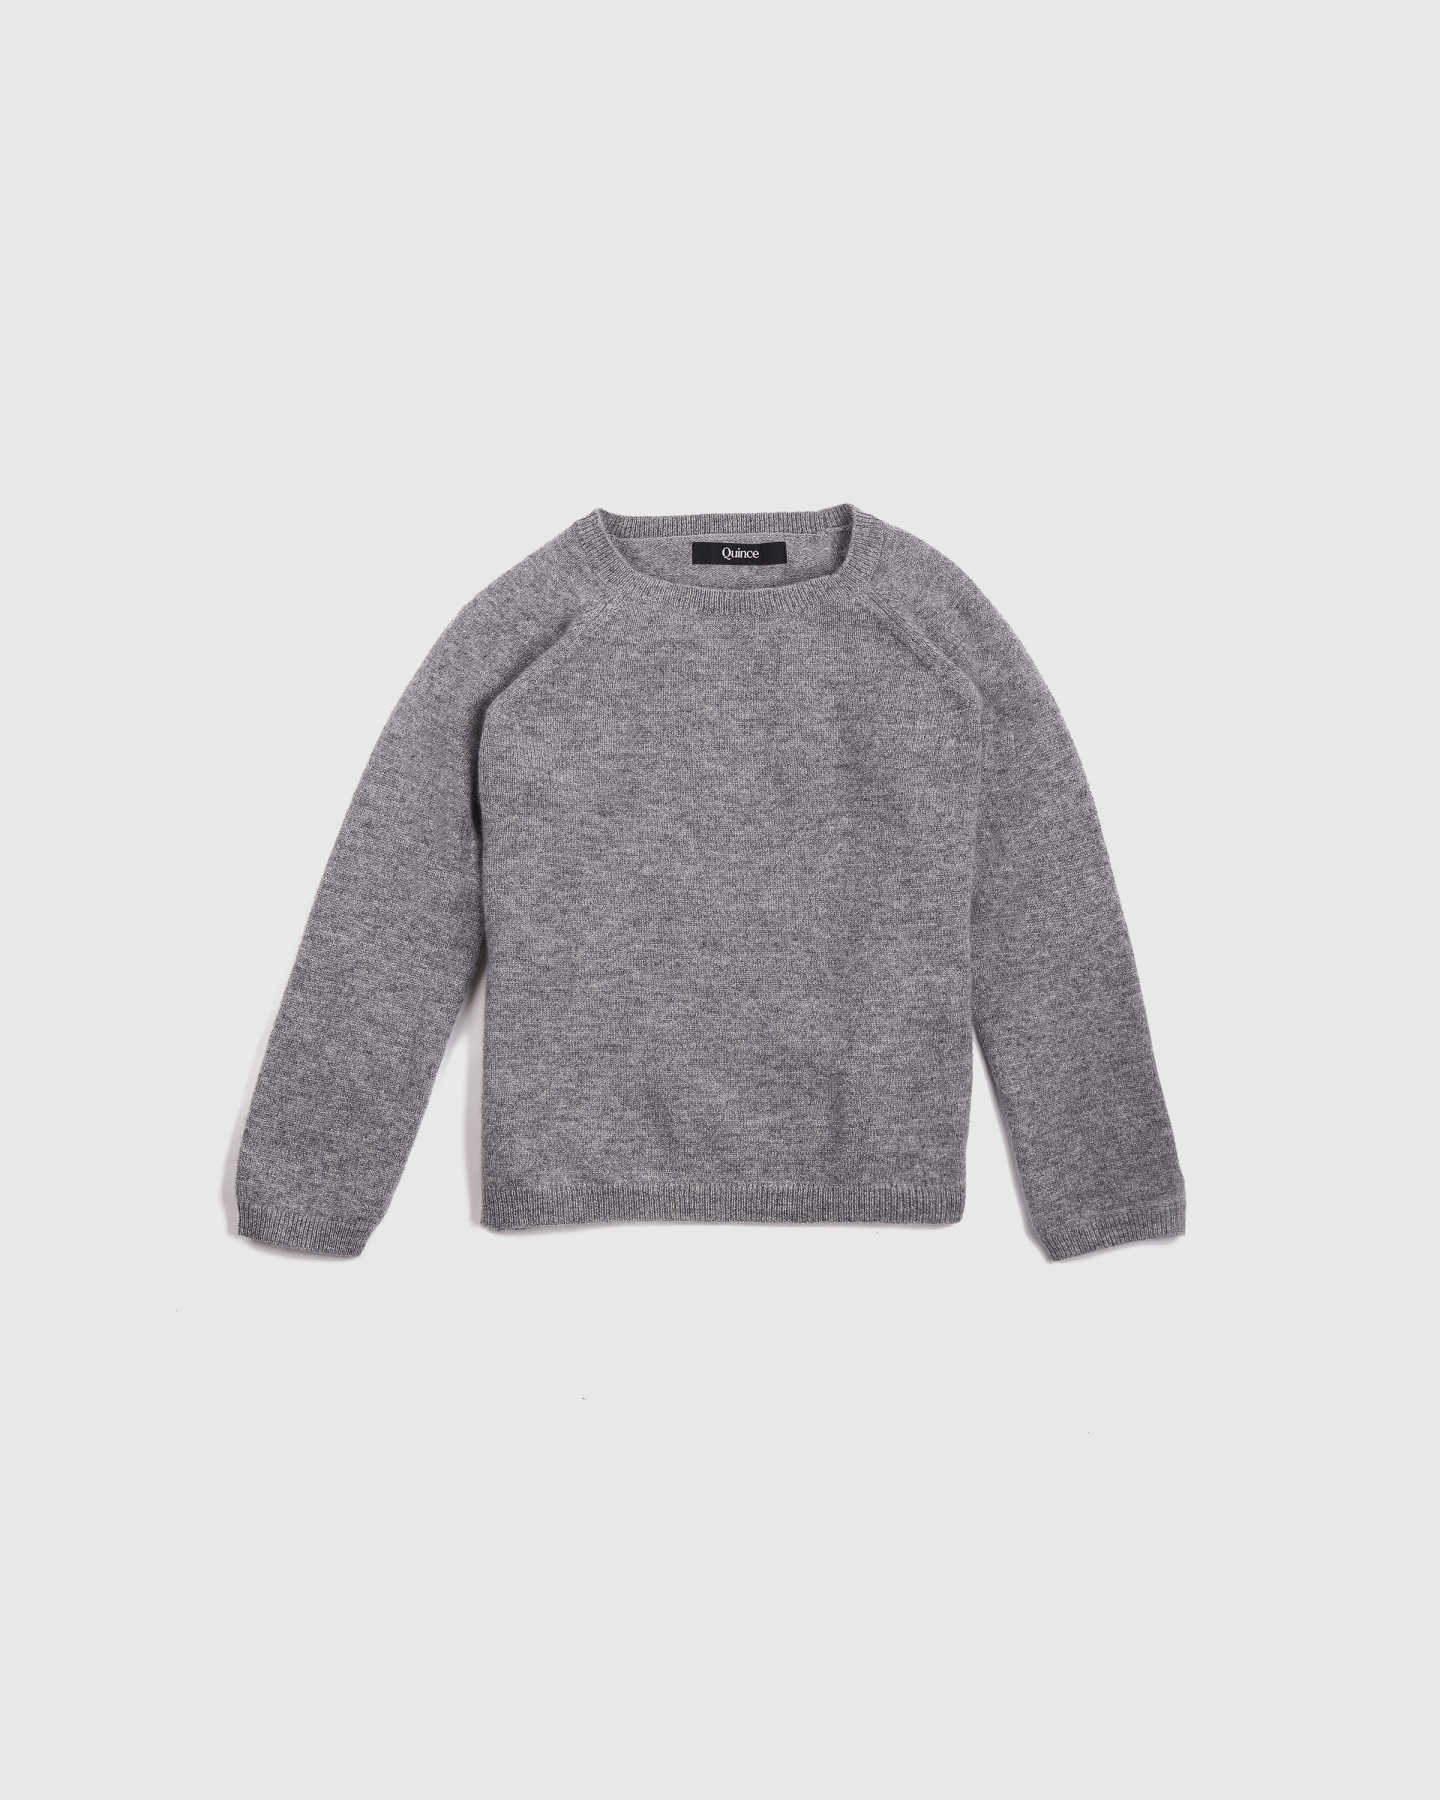 Mongolian Cashmere Toddler Pullover - Heather Grey